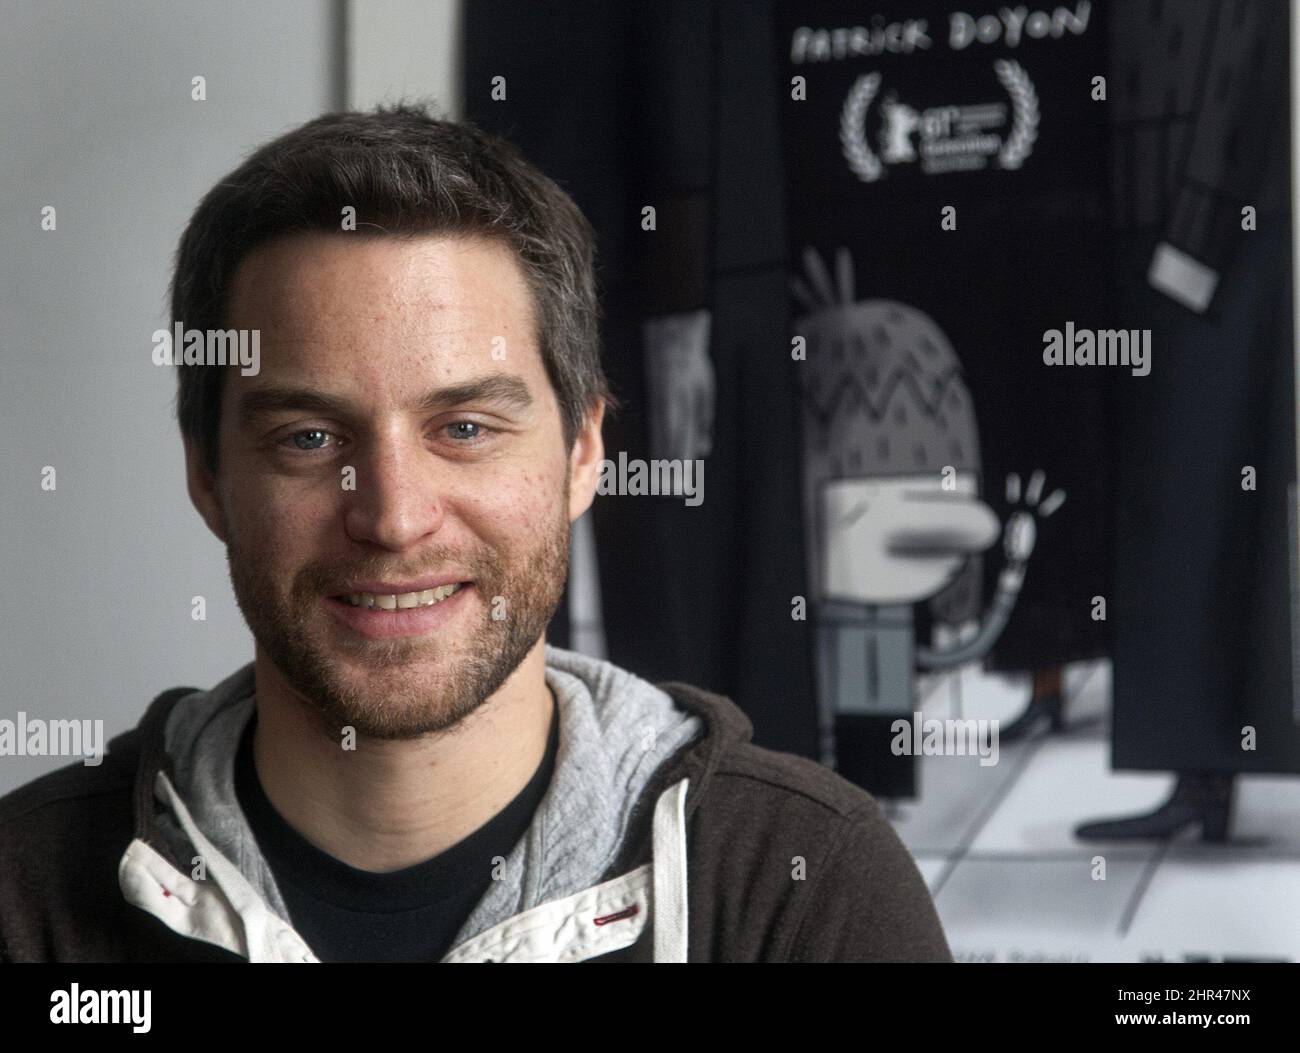 Filmmaker Patrick Doyon poses for a photo in his studio Friday, Feb. 10, 2012 in Montreal. Doyon's animated short film 'Sunday/Dimanche,' is nominated for an Academy Award. (AP Photo/The Canadian Press, Ryan Remiorz) Stock Photo